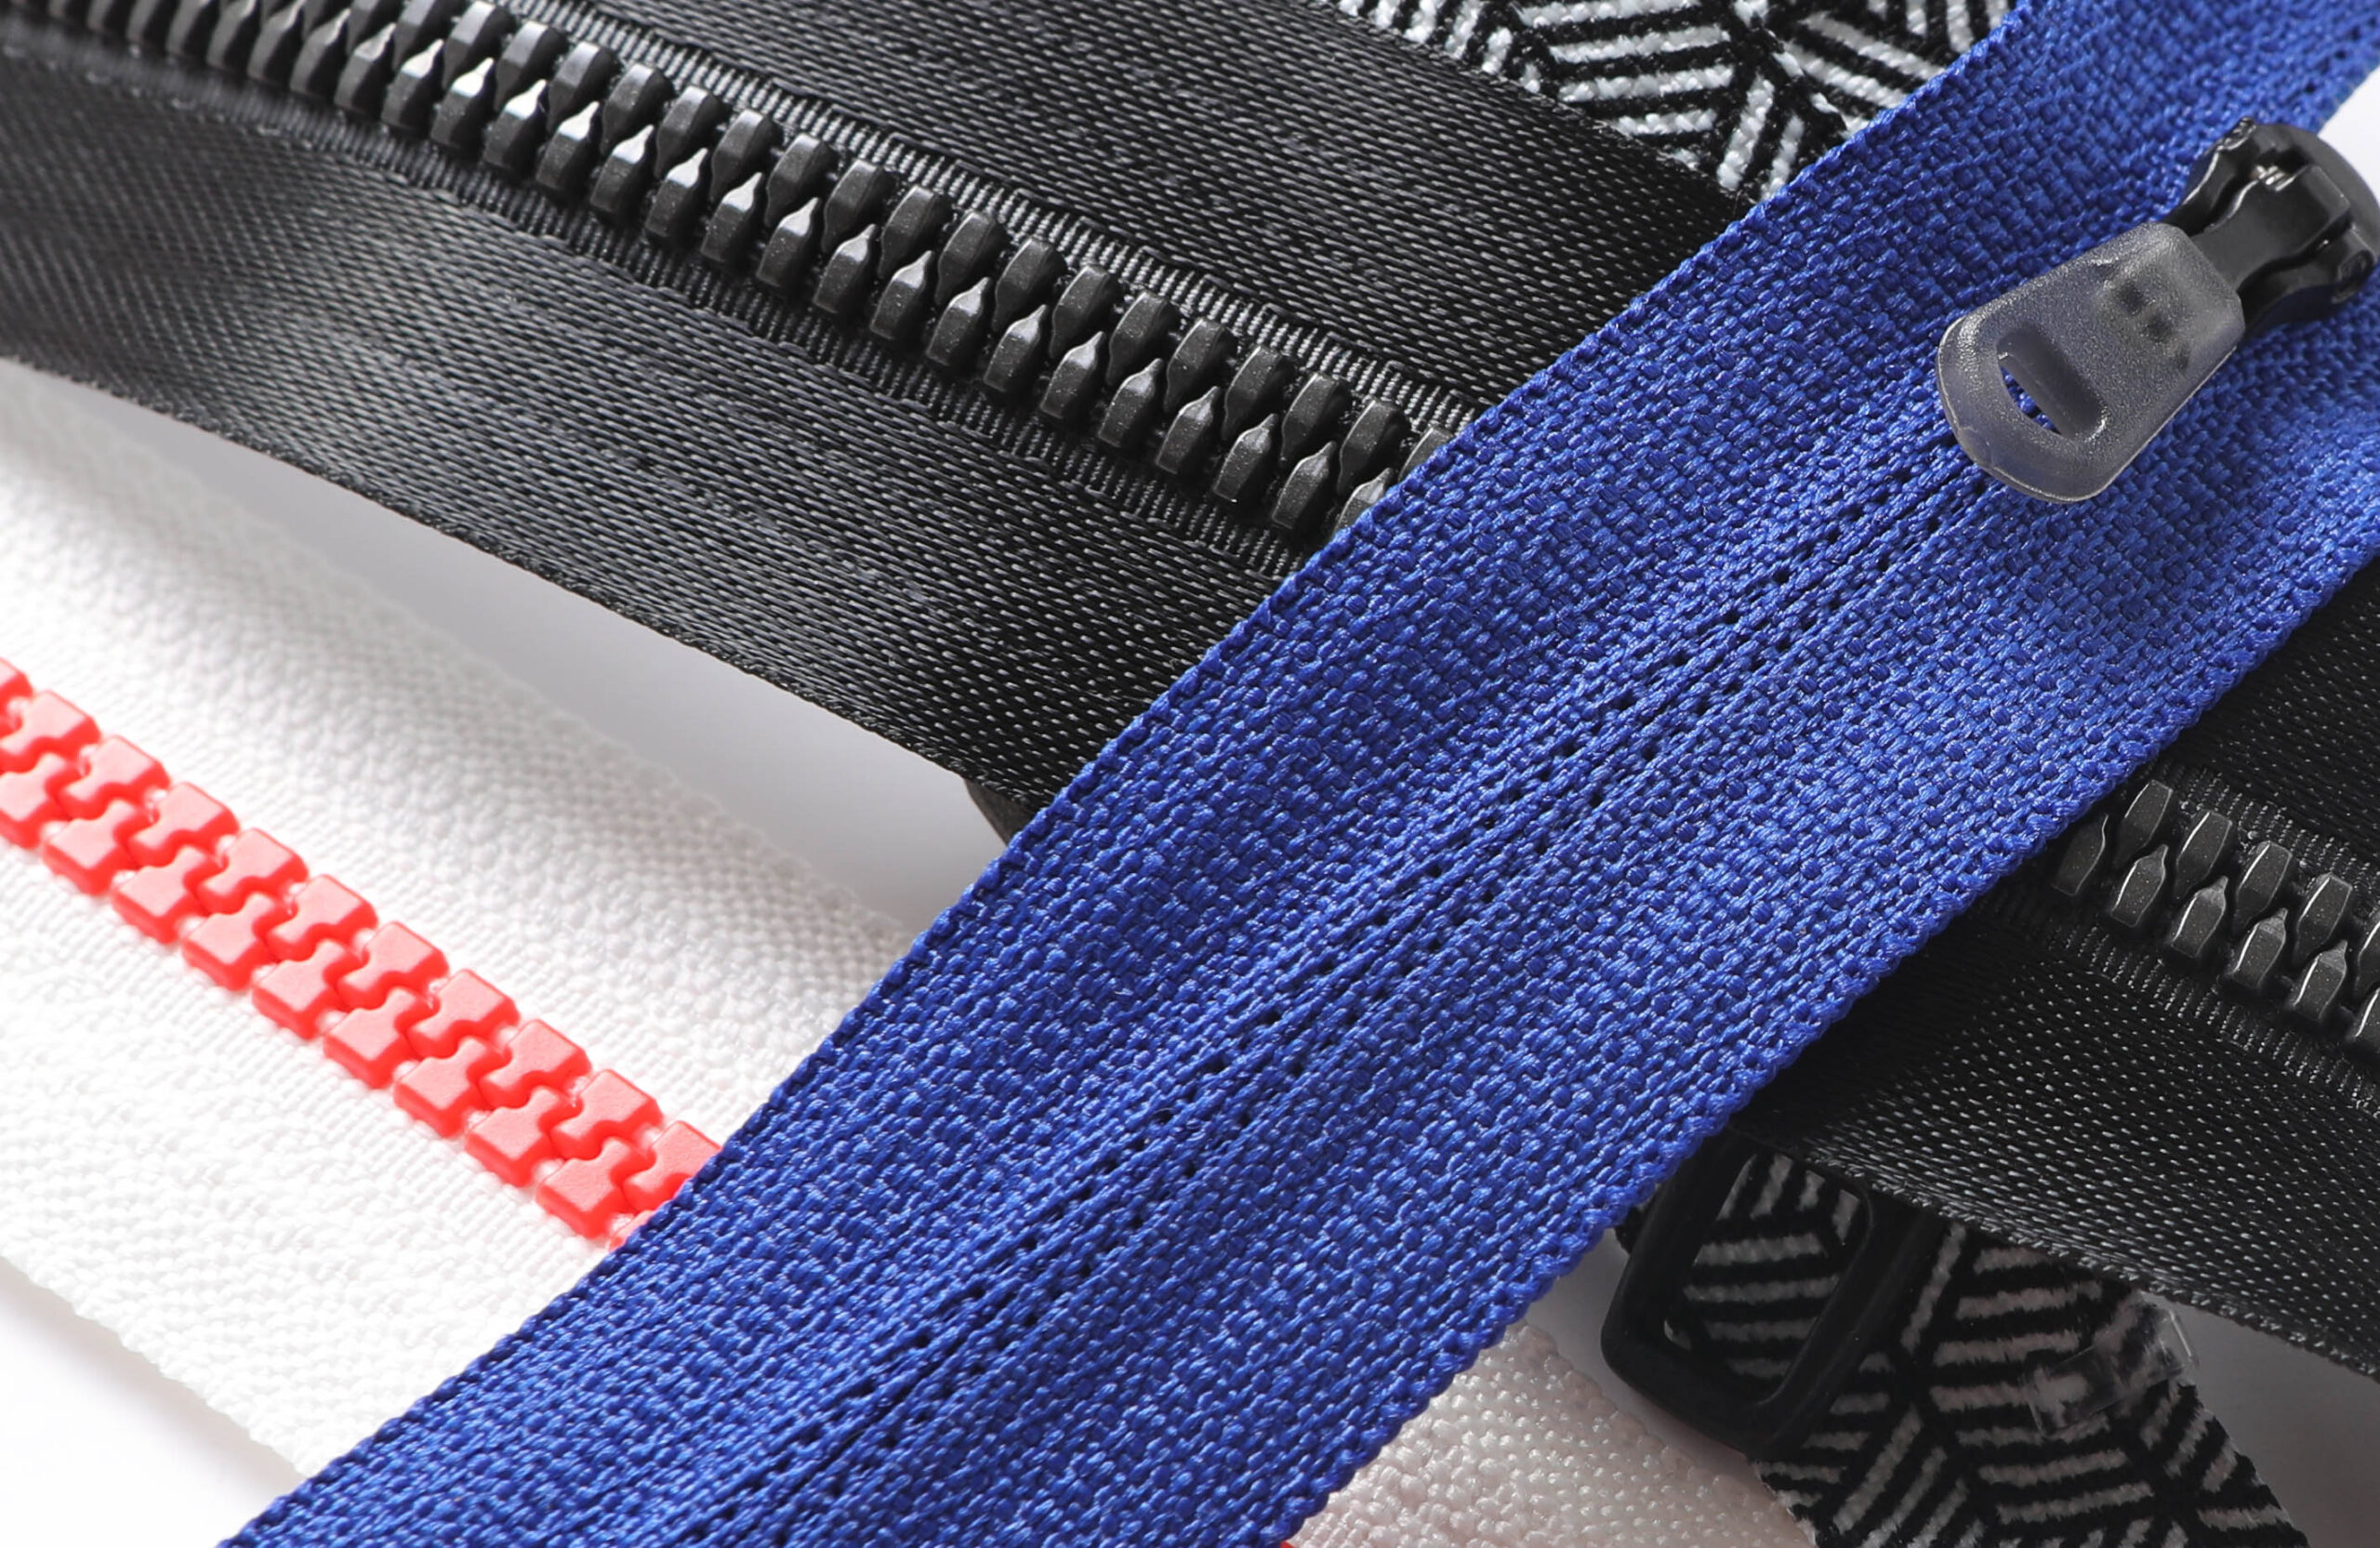 ykk zippers prices, ykk zippers prices Suppliers and Manufacturers